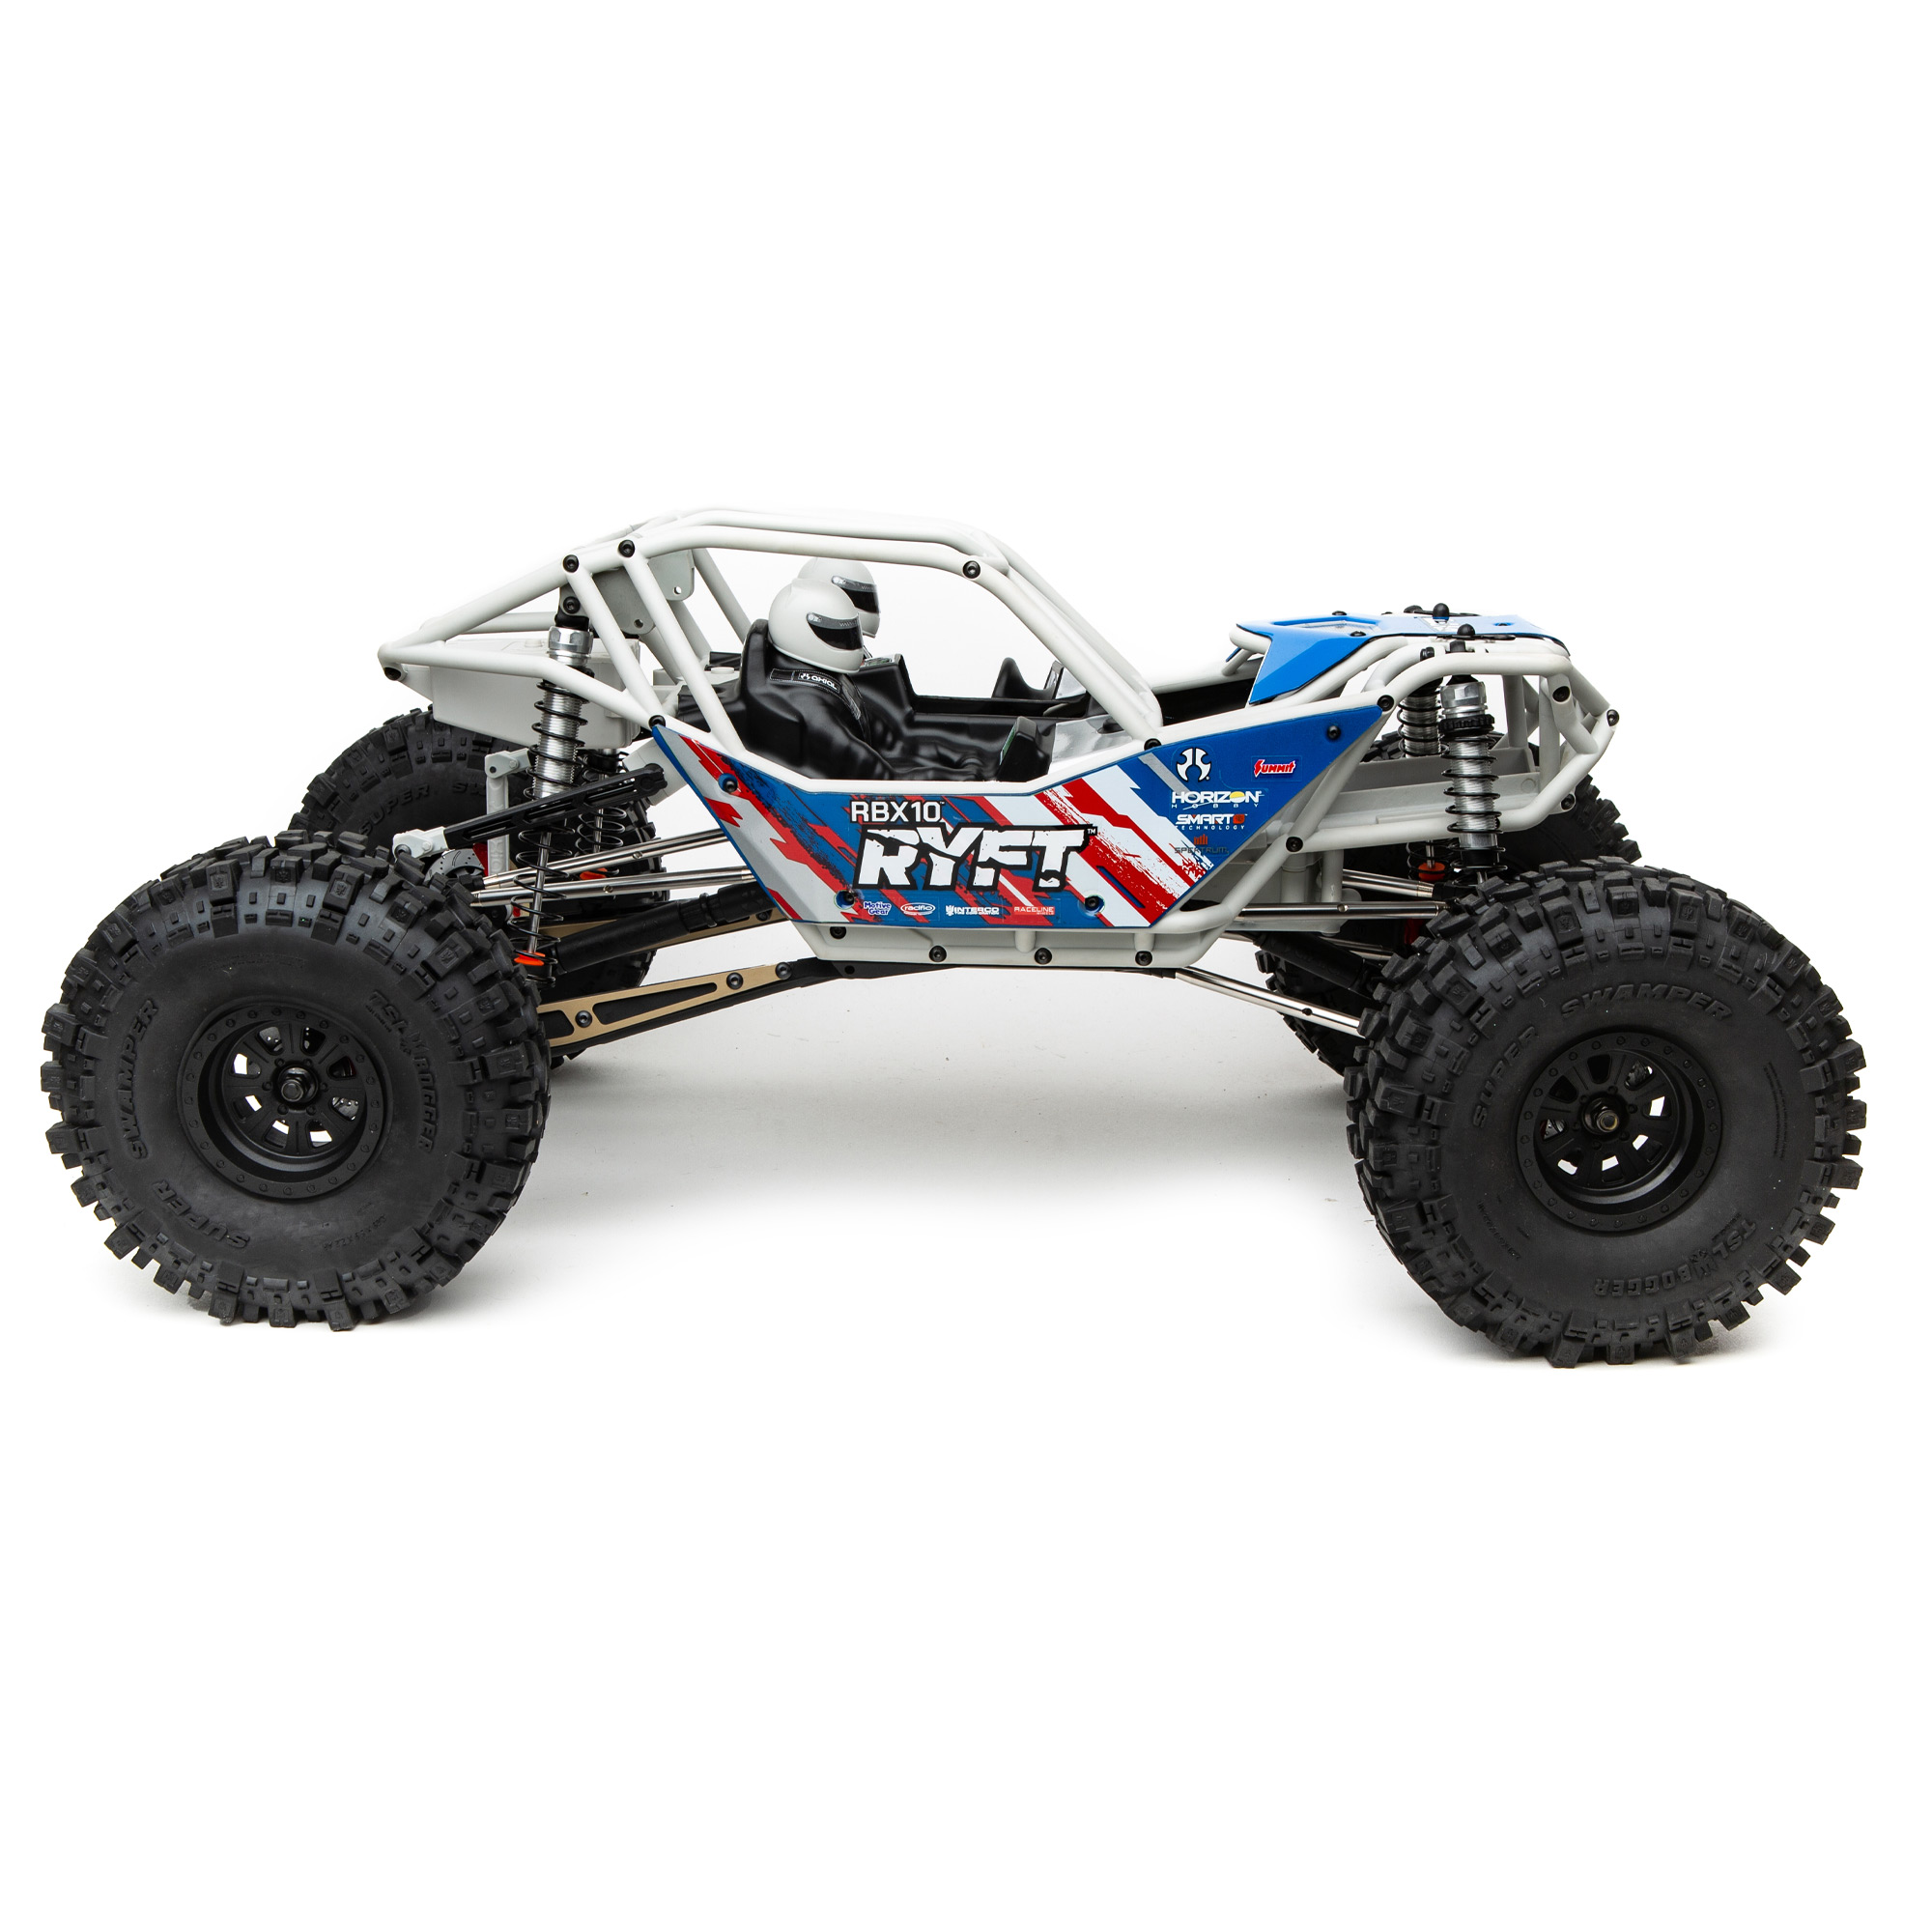 Axial RC Truck 1/10 RBX10 Ryft 4 Wheel Drive Rock Bouncer Kit Gray AXI03009 Trucks Elec Kit 1/10 Off-Road - image 3 of 11